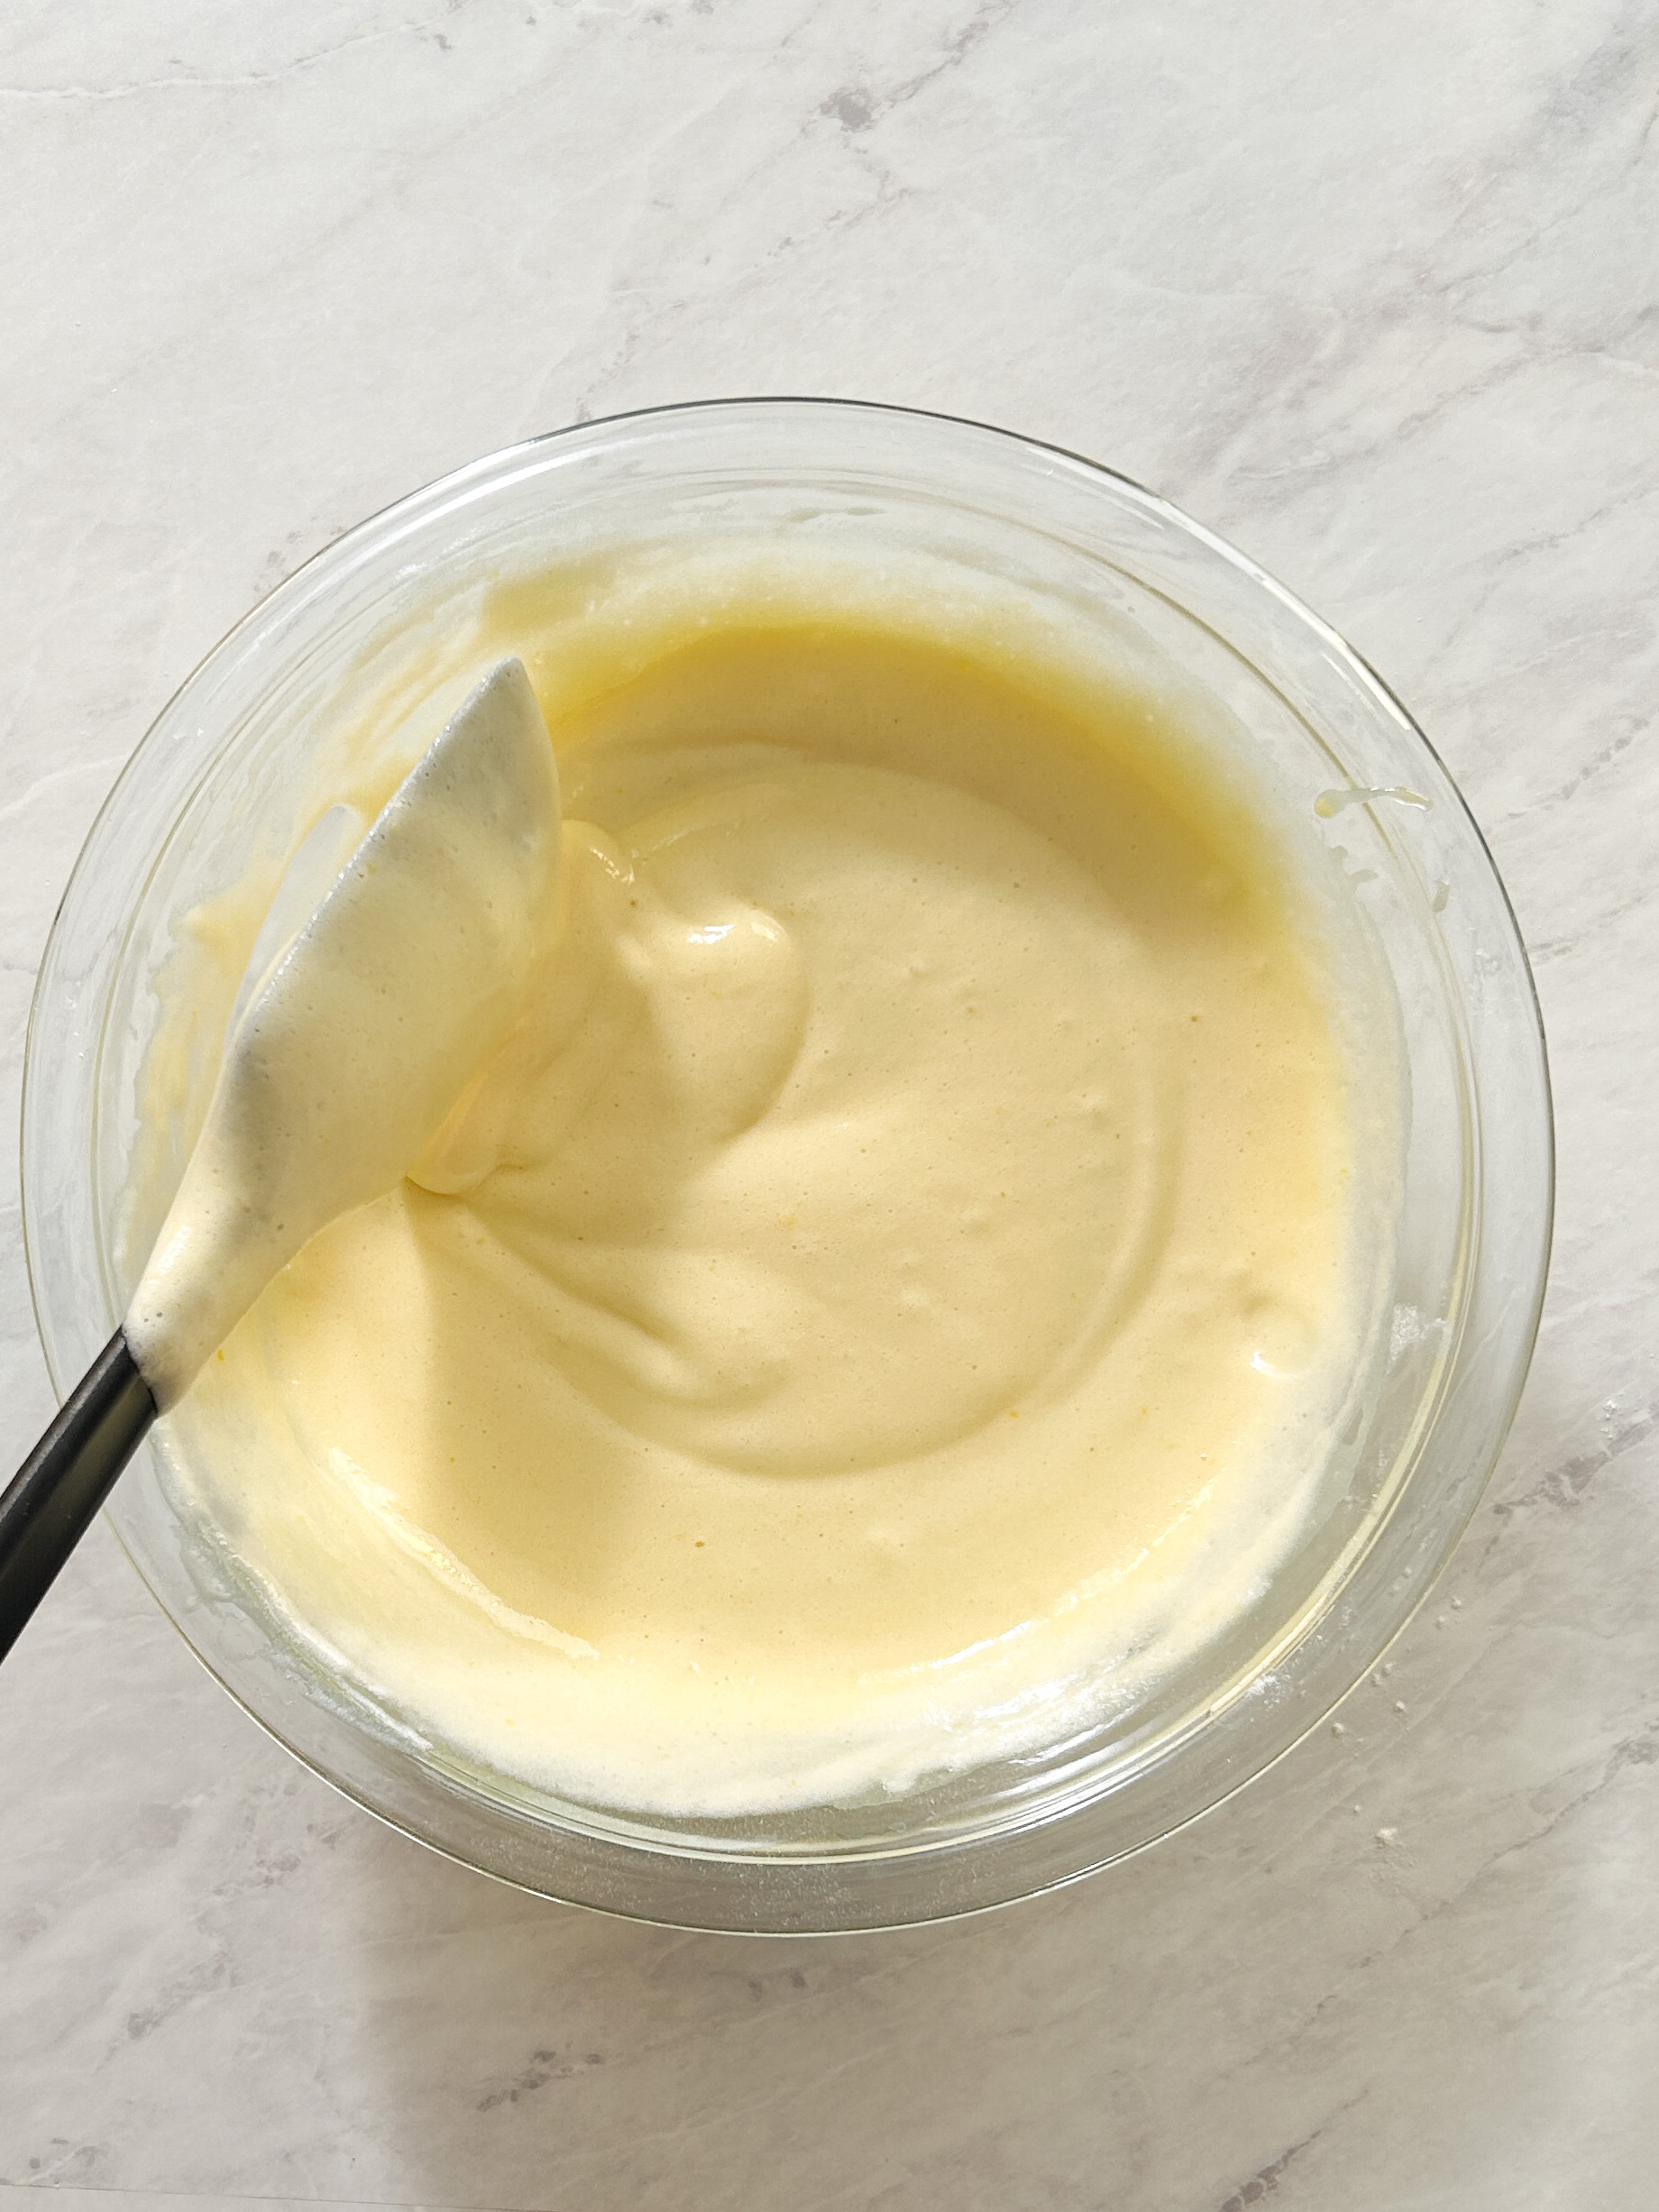 light and airy chiffon cake batter in a glass bowl